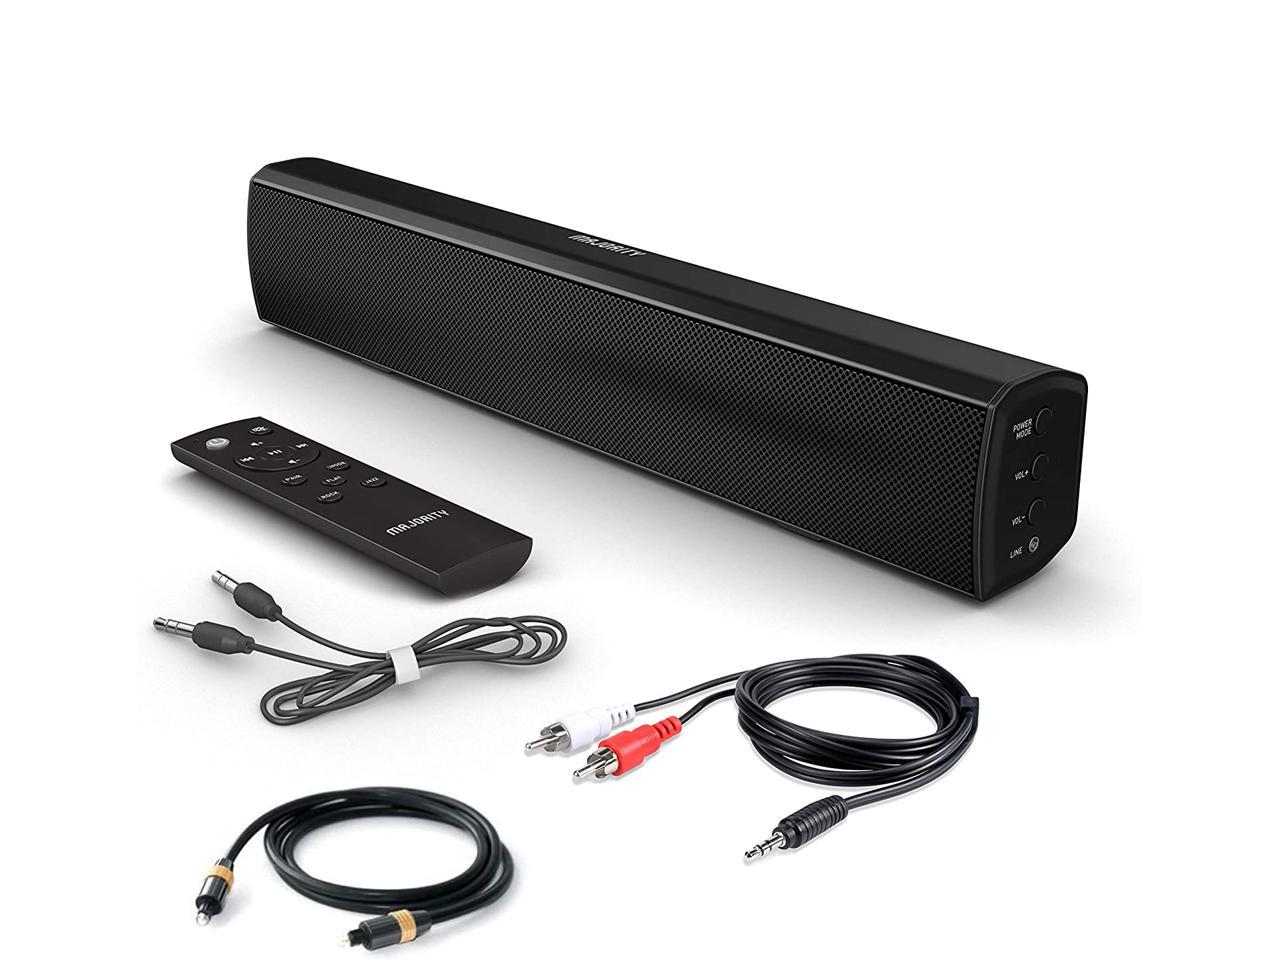 15 inch RCA Majority Bowfell Small Sound Bar for TV with Bluetooth 50 watt Gaming USB Mini Sound/Audio System for TV Speakers/Home Theater AUX Connection Opt Projectors 